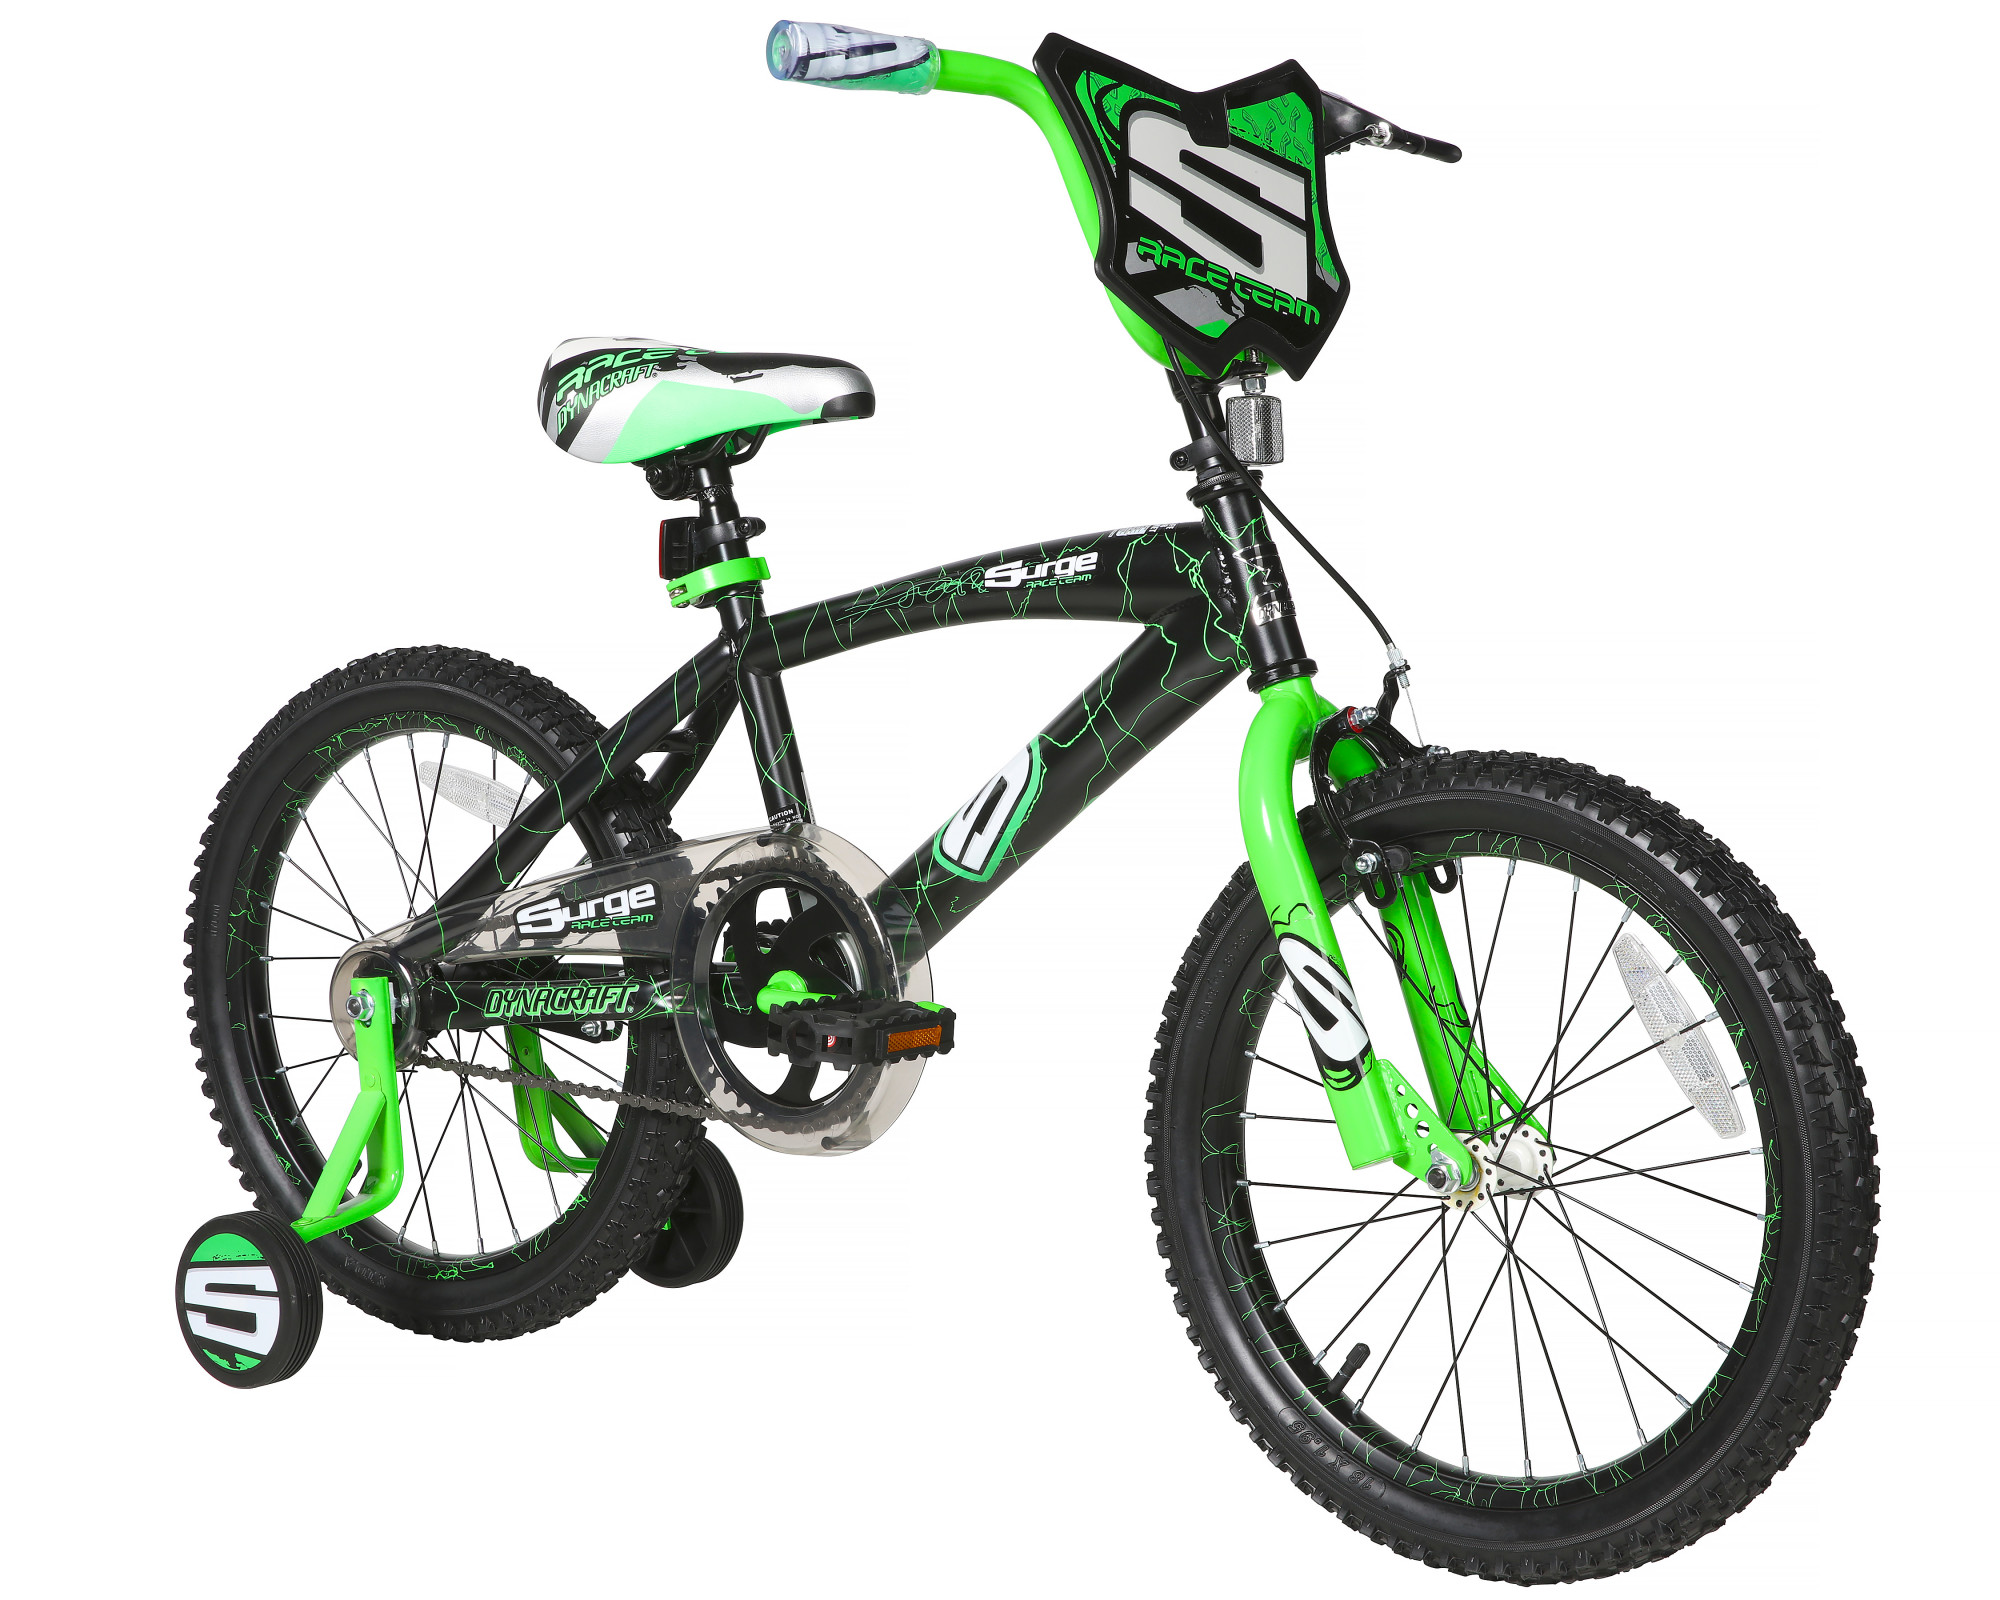 Dynacraft Surge18-inch Boys BMX Bike for Children Age 6-9 years - image 1 of 12